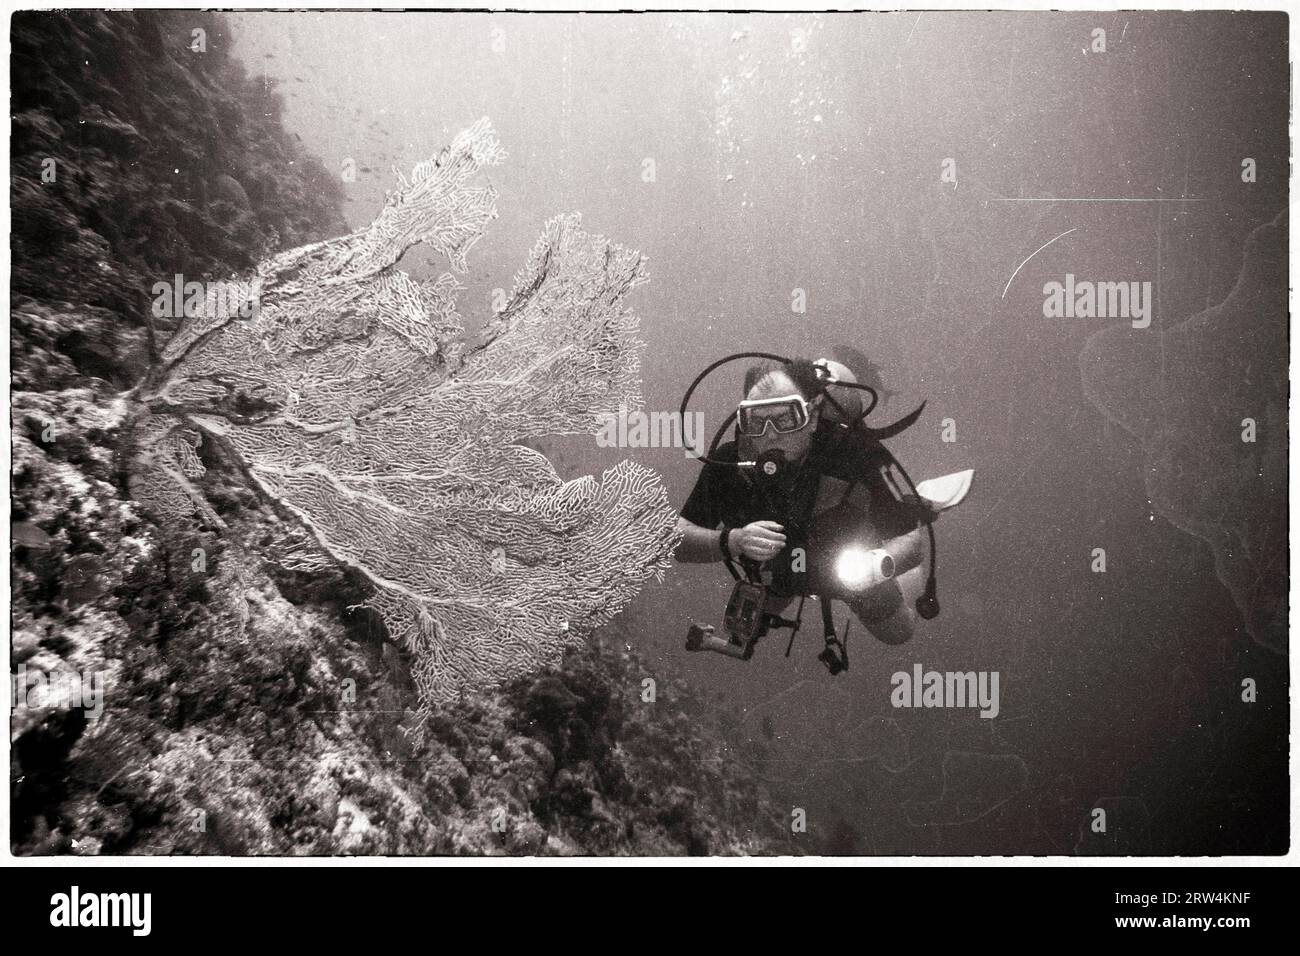 Divers on the coral reef Stock Photo